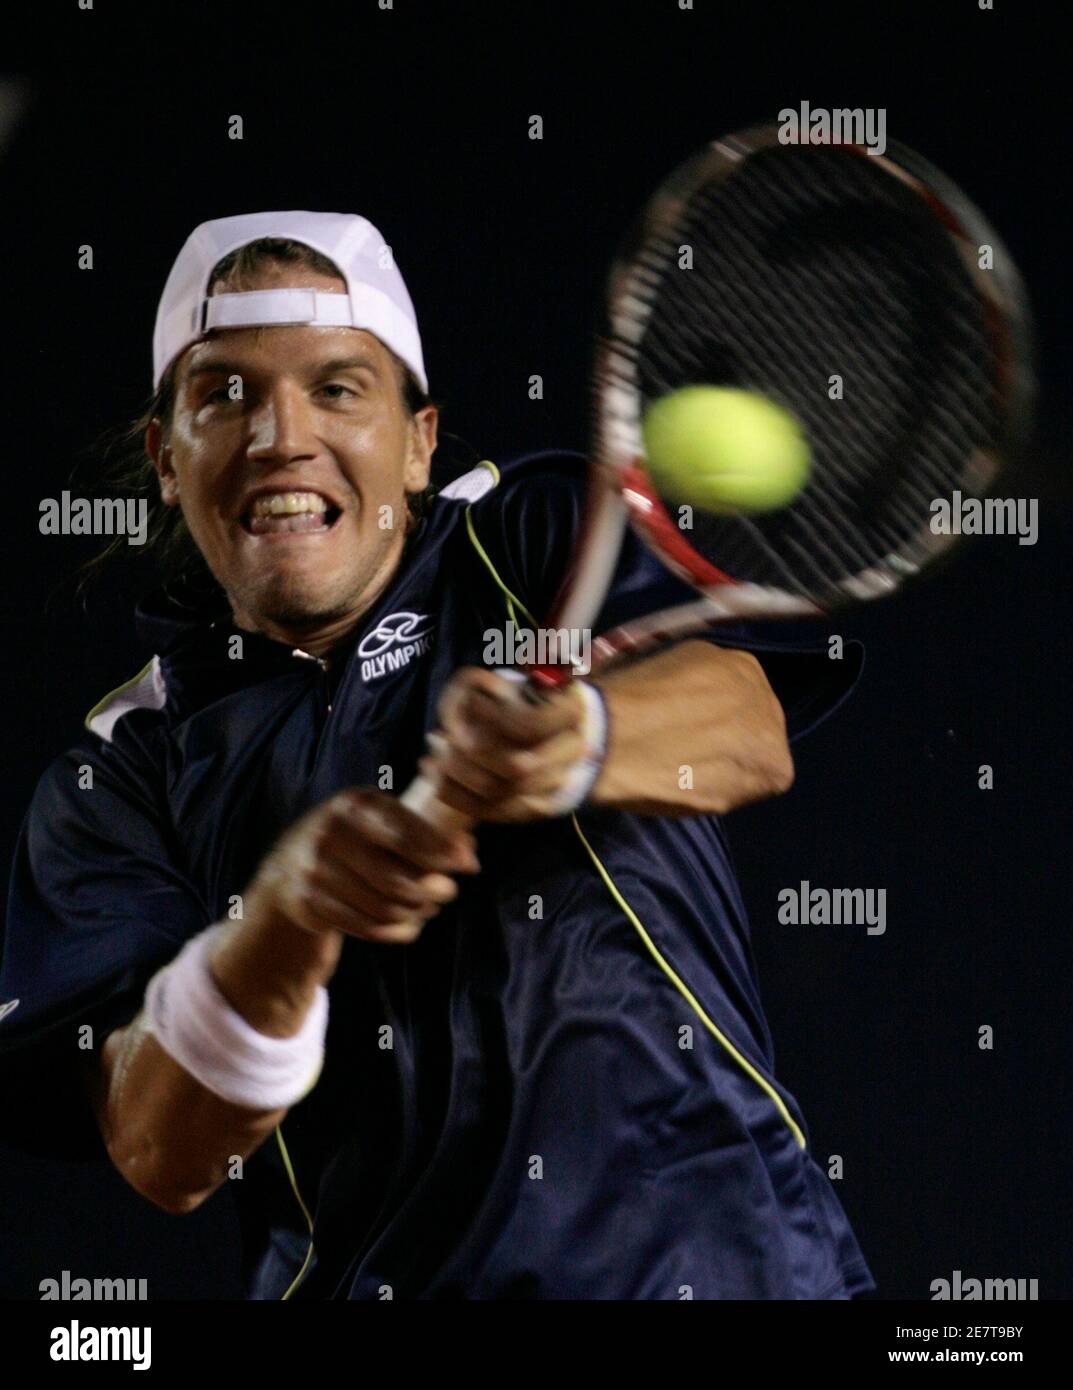 Argentina's Juan Pablo Brzezicki returns the ball to compatriot Juan Monaco during their match at the Mexican Open tennis tournament in Acapulco February 25, 2008. REUTERS/Daniel Aguilar (MEXICO) Stock Photo